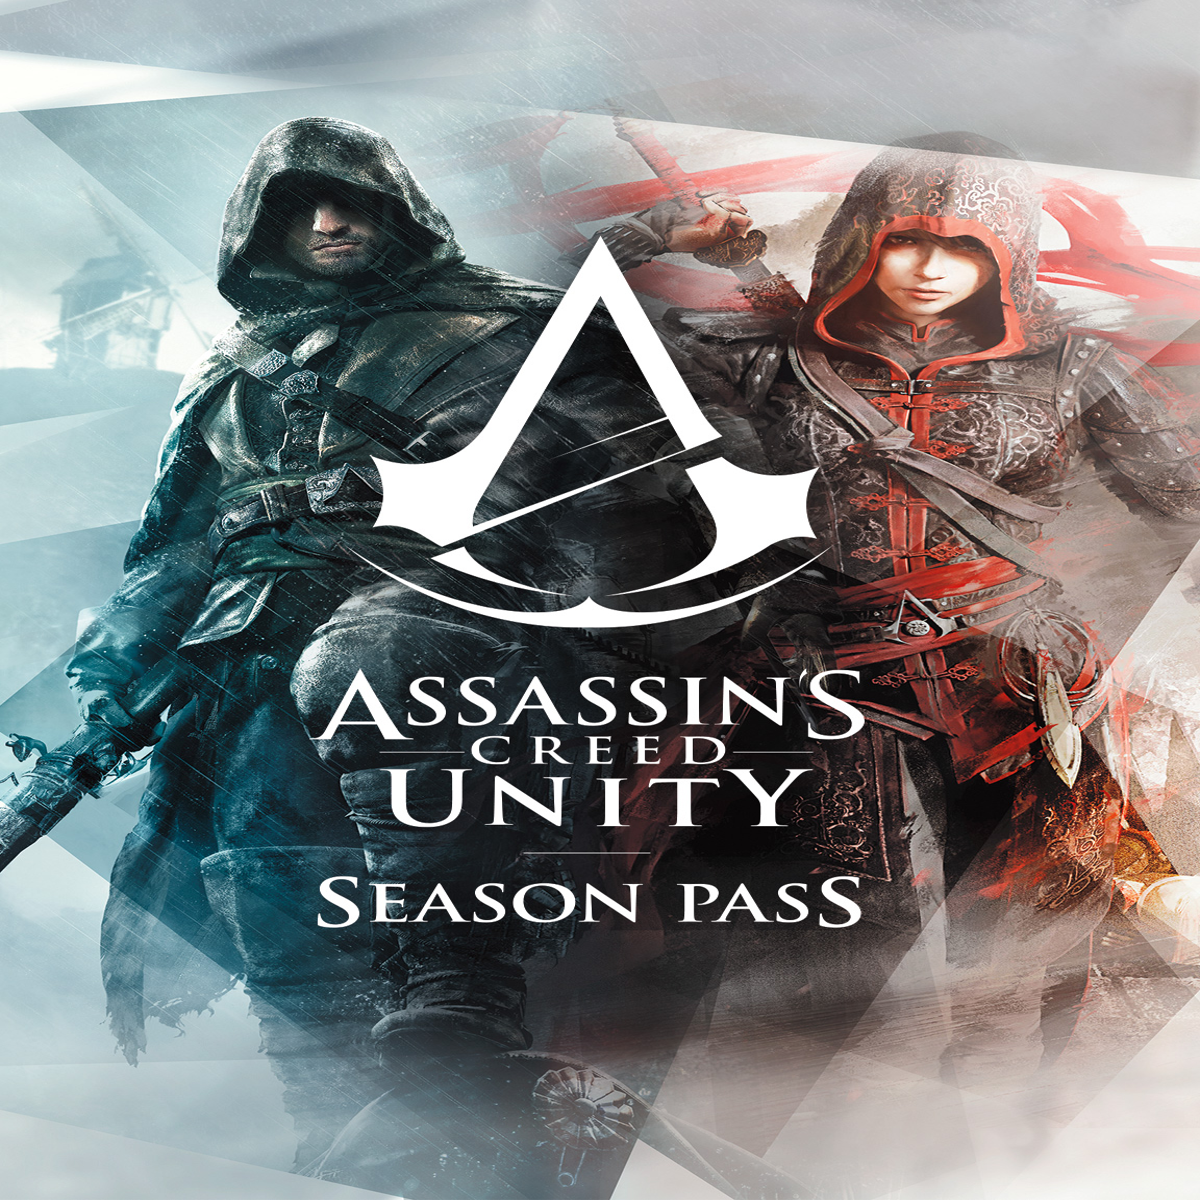 Get Assassin's Creed® Unity - Dead Kings